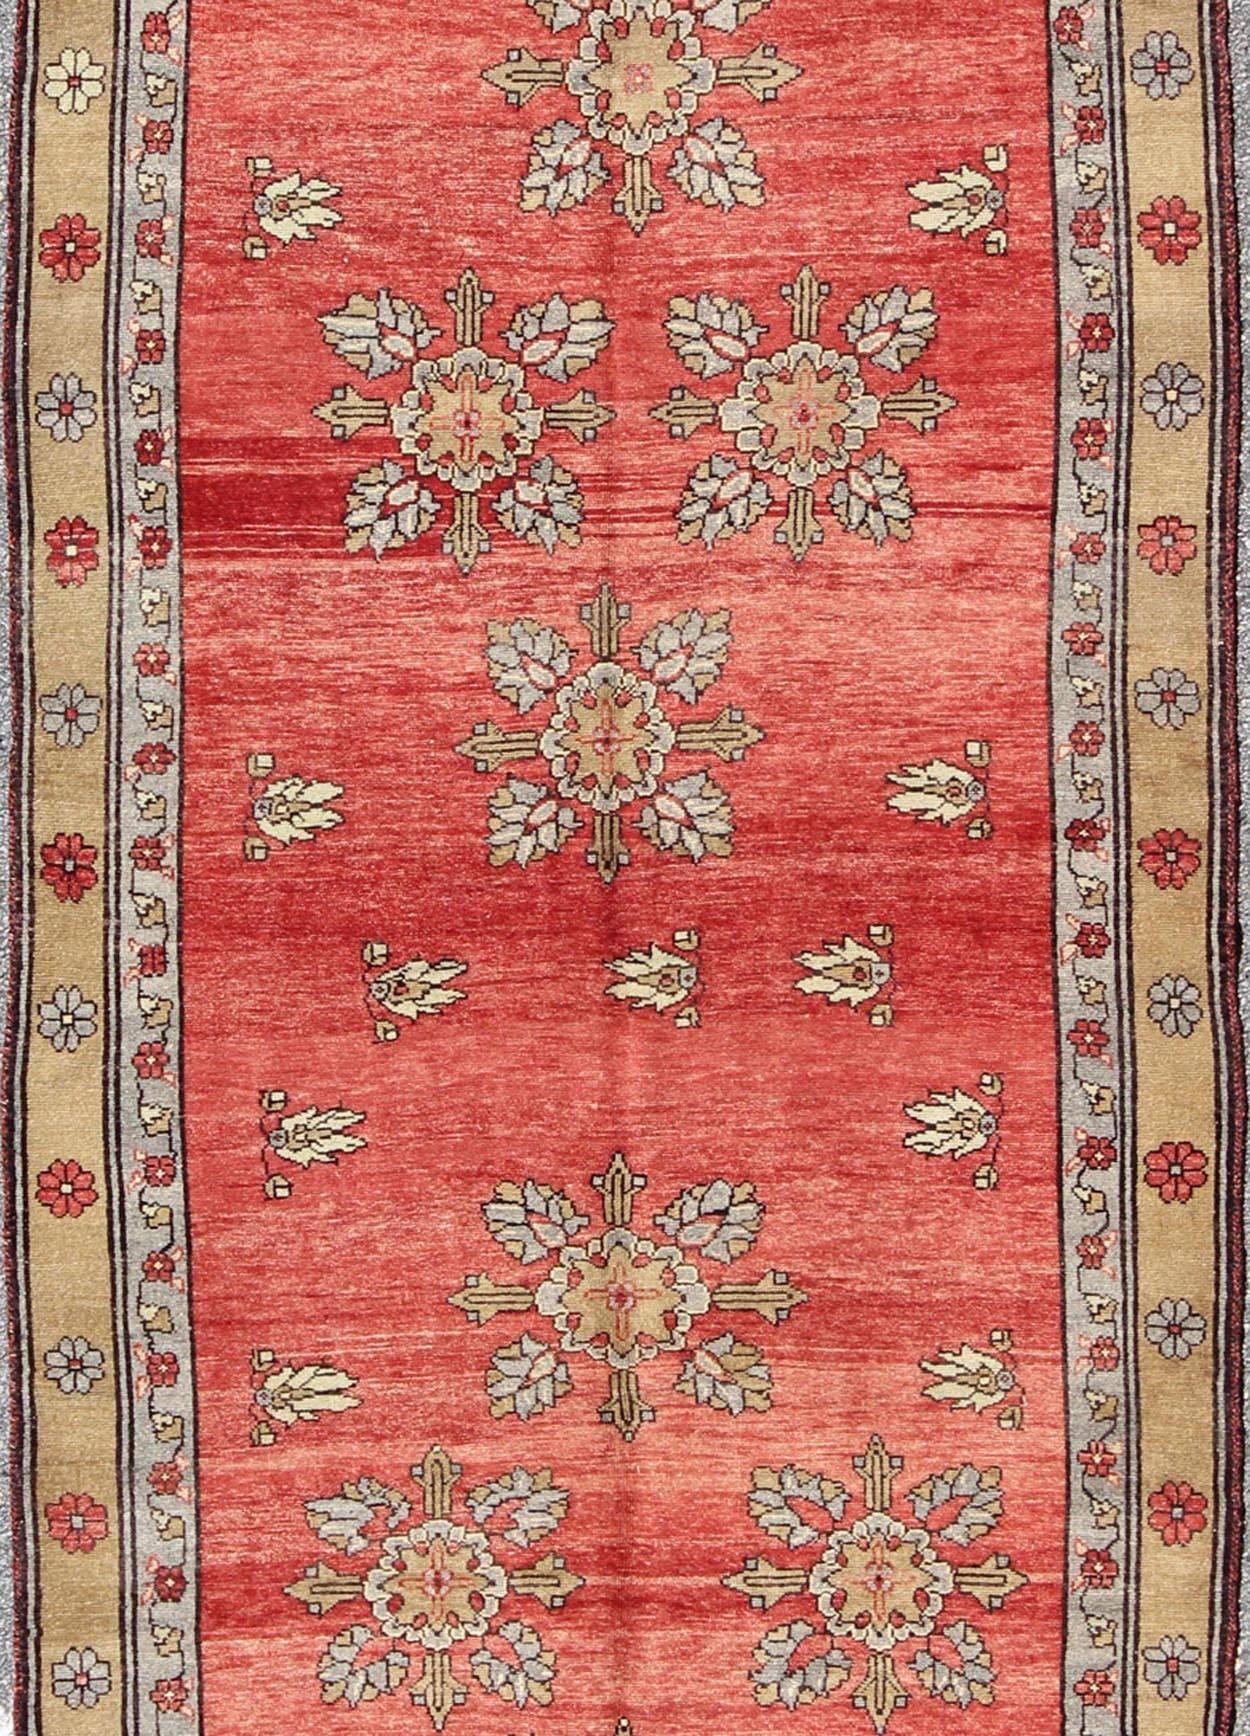 Hand-Knotted Vintage Turkish Oushak Carpet with Flowers in the Central Field and Borders For Sale